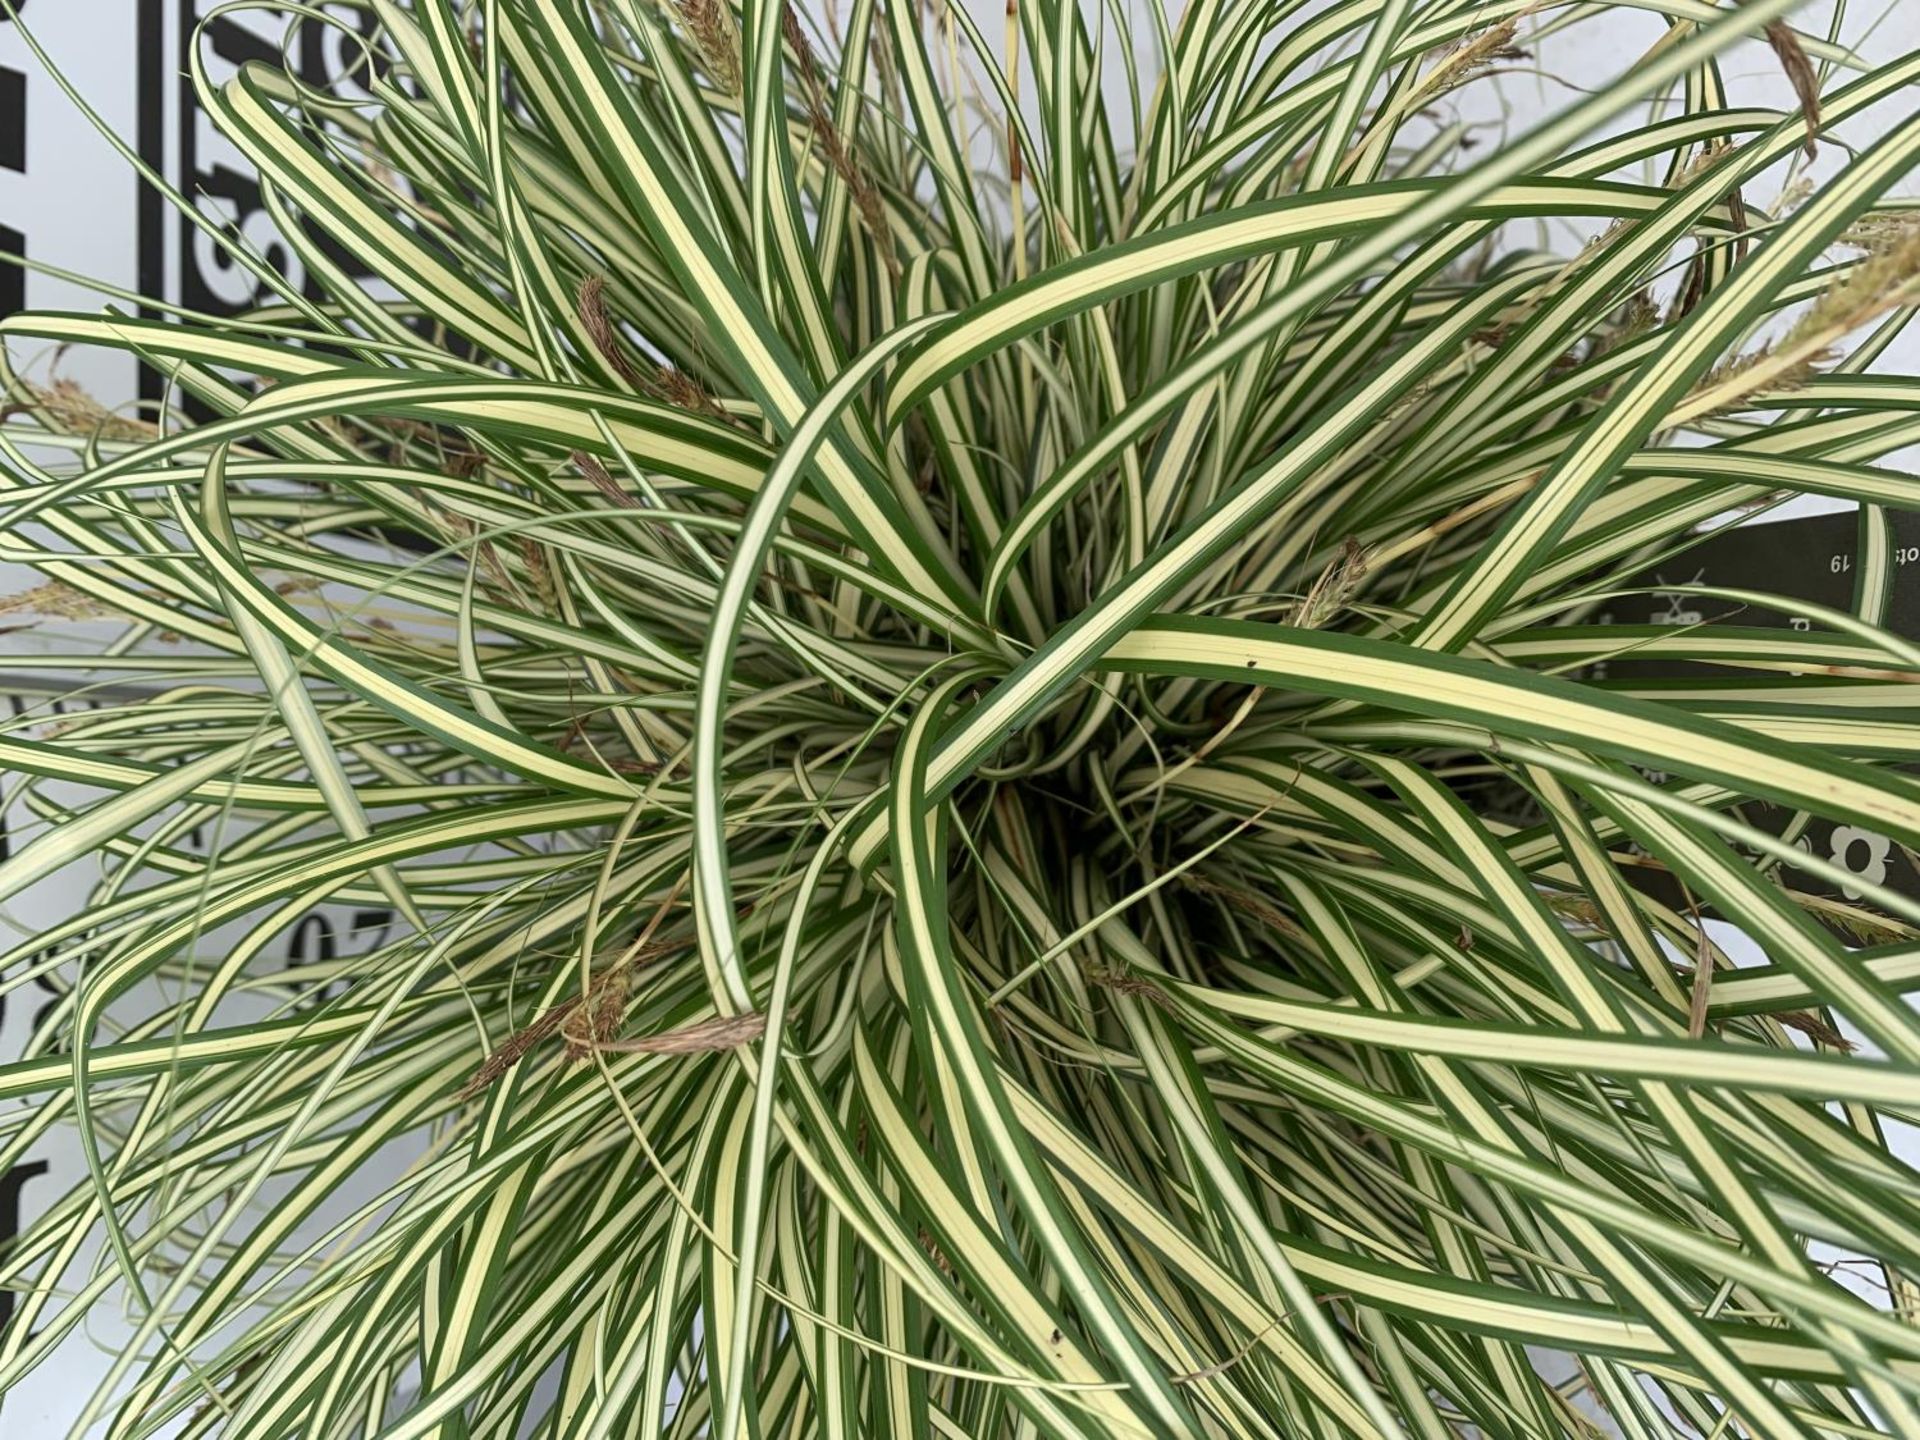 TWO HARDY ORNAMENTAL GRASSES CAREX 'EVERGOLD' AND 'EVEREST' IN 3 LTR POTS APPROX 40CM IN HEIGHT PLUS - Image 11 of 12